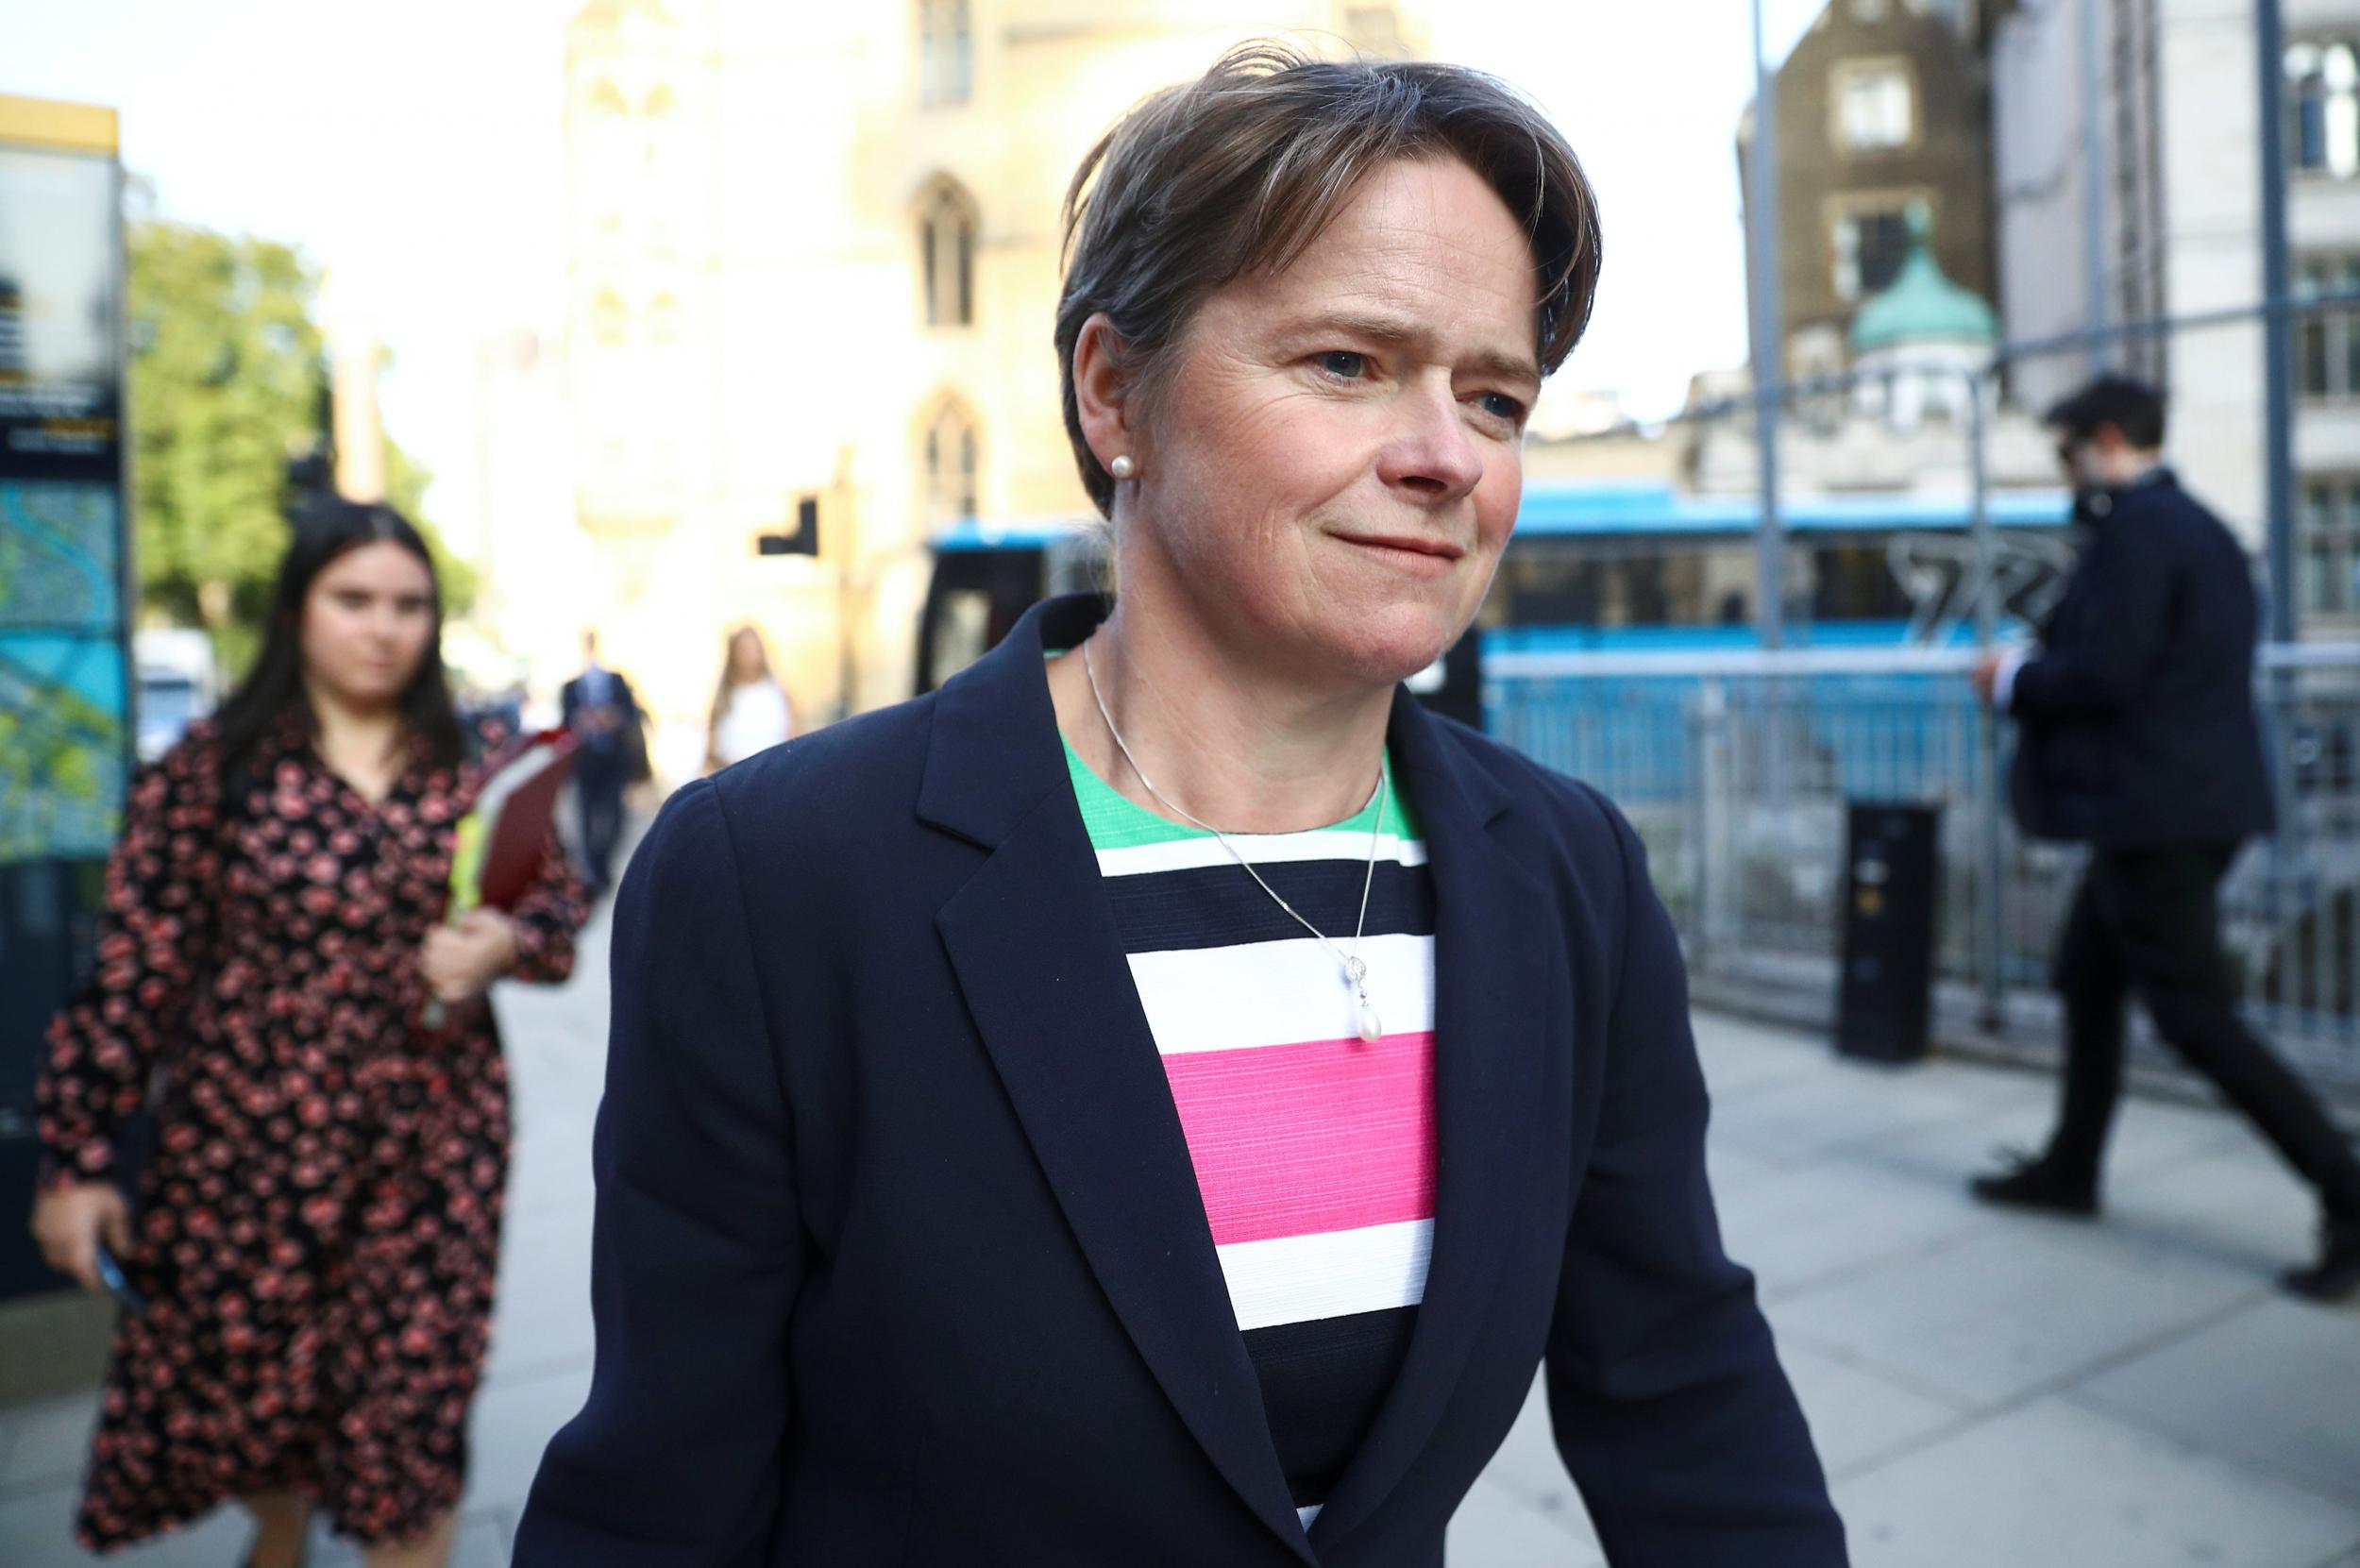 Dido Harding will leave her role with the NHS in October